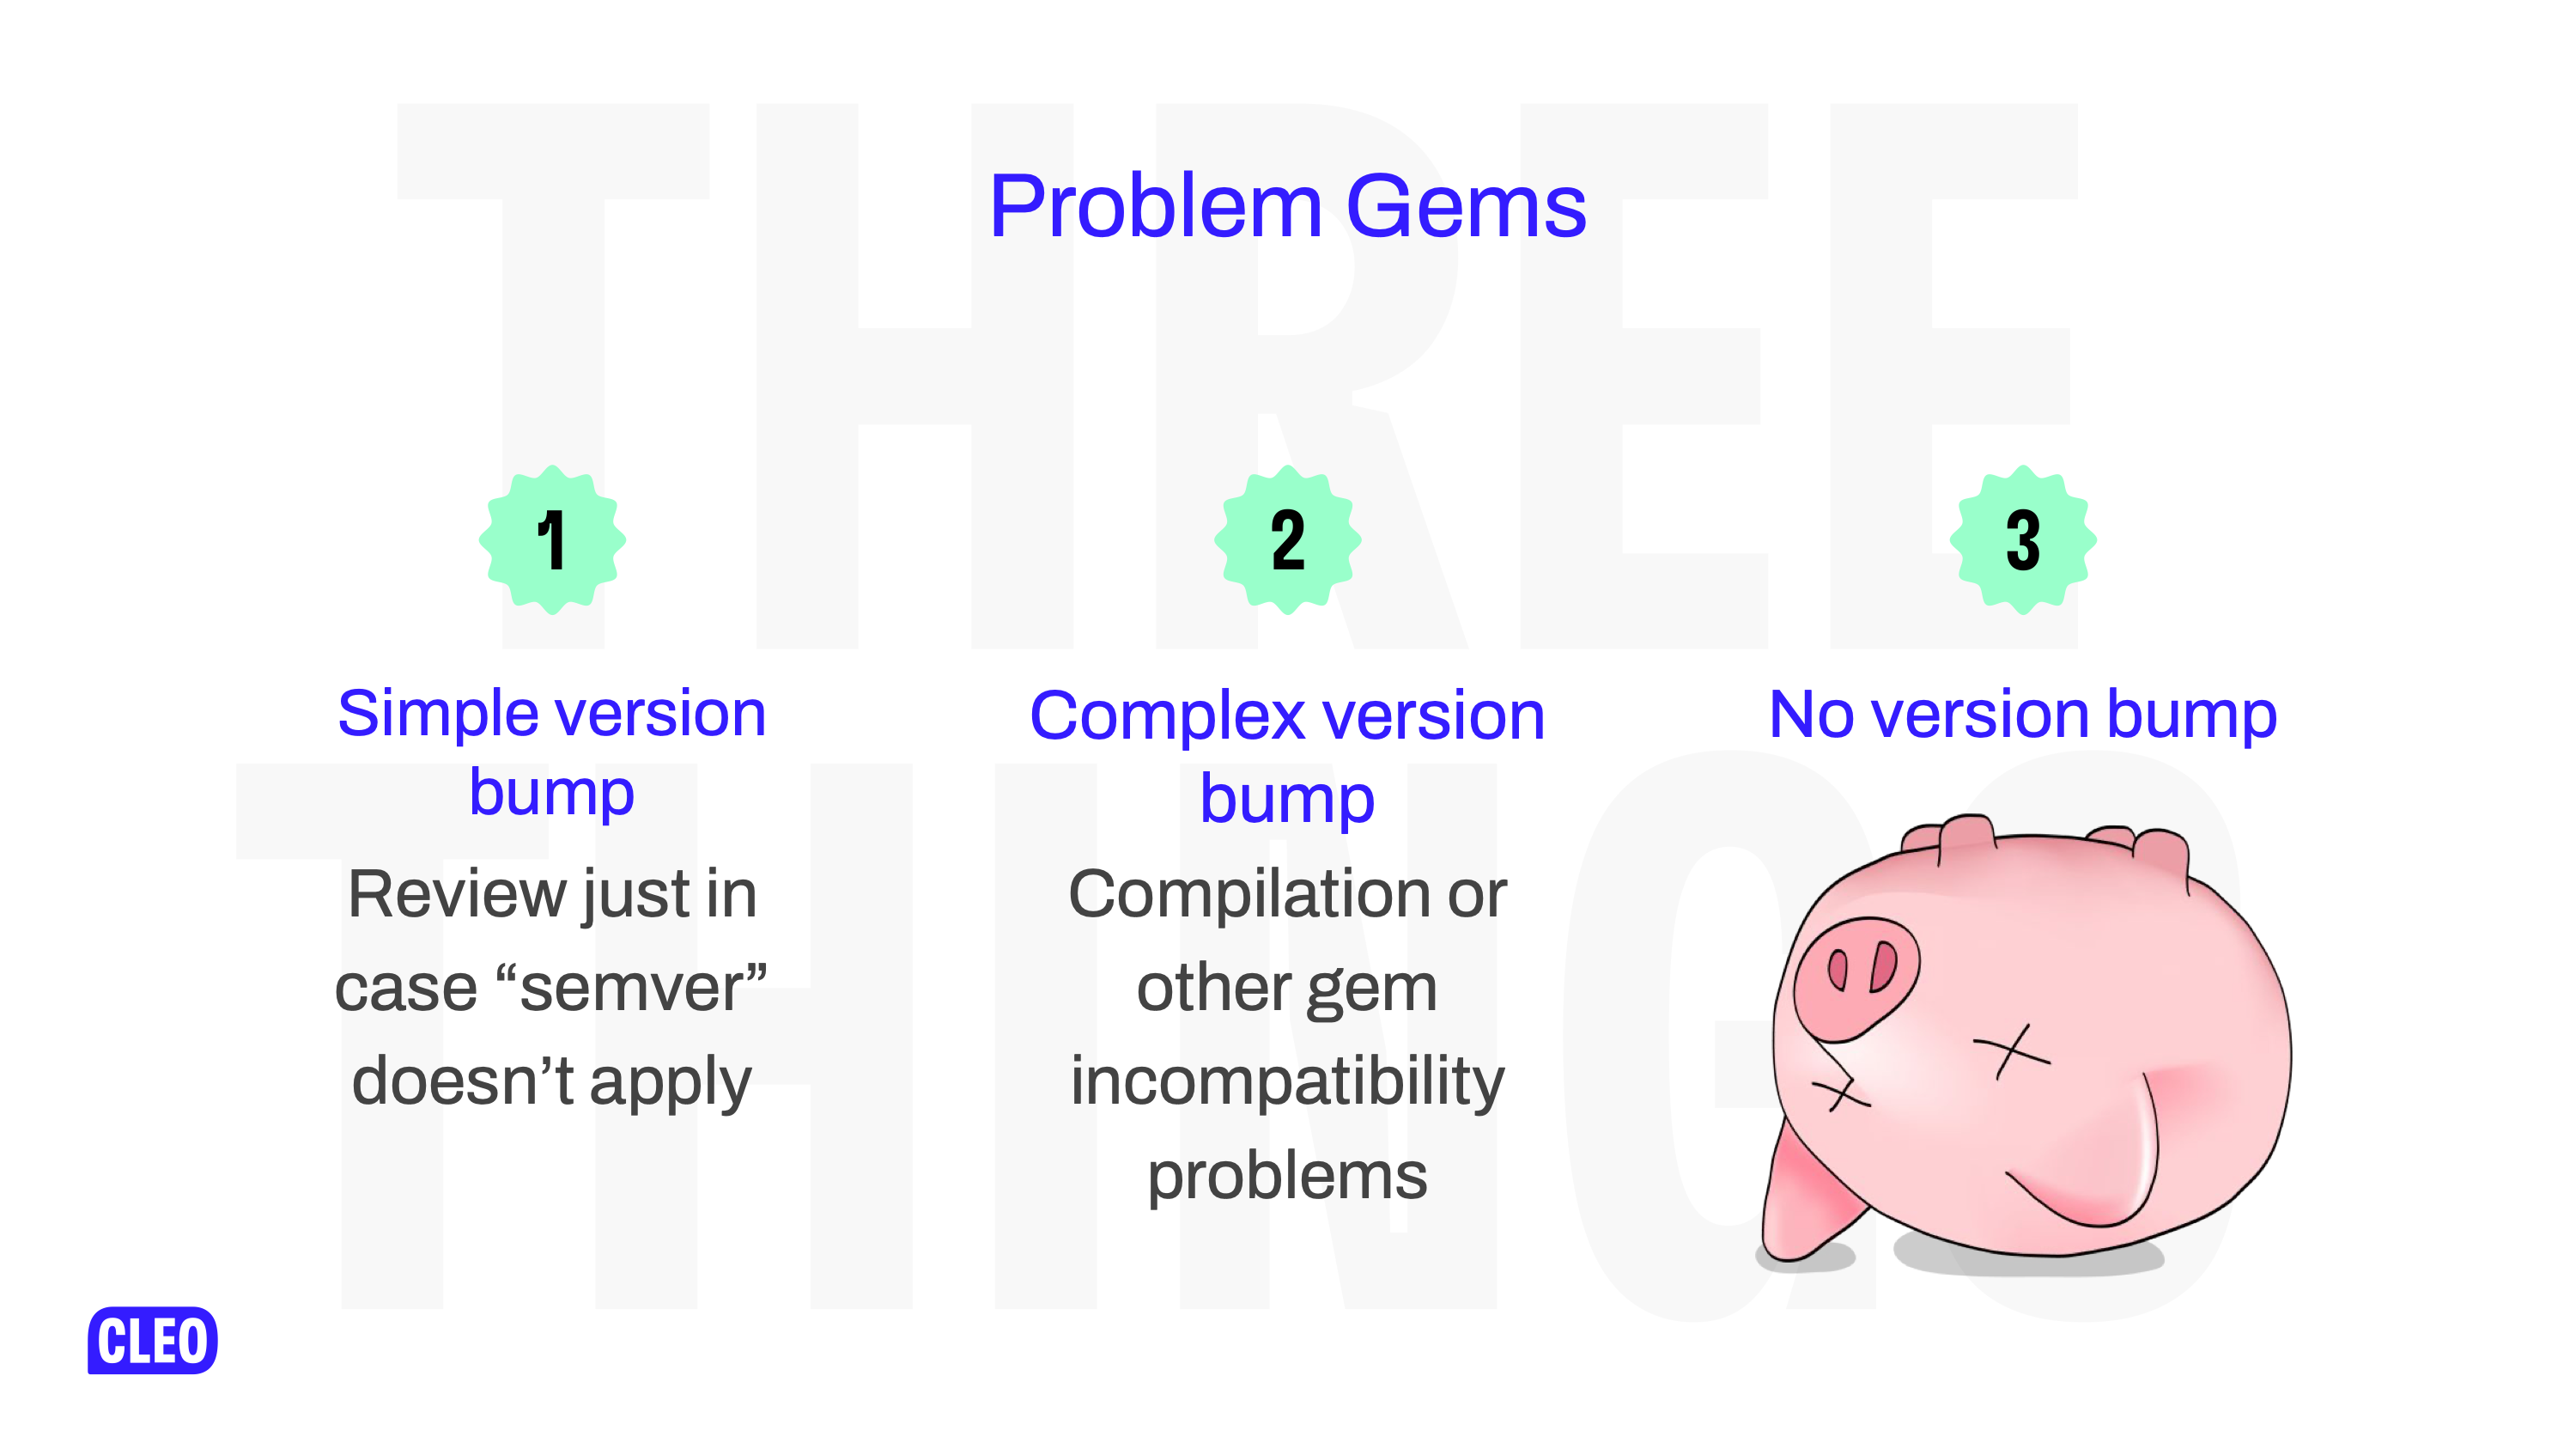 3 points outlining the different types of problems we had with gems 1 - gems with a simple version bump, 2 - gems with a complex version bump, 3 - gems with no version bump (there is a dead pig graphic here to say how we feel about that), text: Problem Gems, 1: Simple version bump, Review just in case 'semver' doesn't apply, 2: Complex version bump, Compilation or other gem incompatibility, 3: no version bump